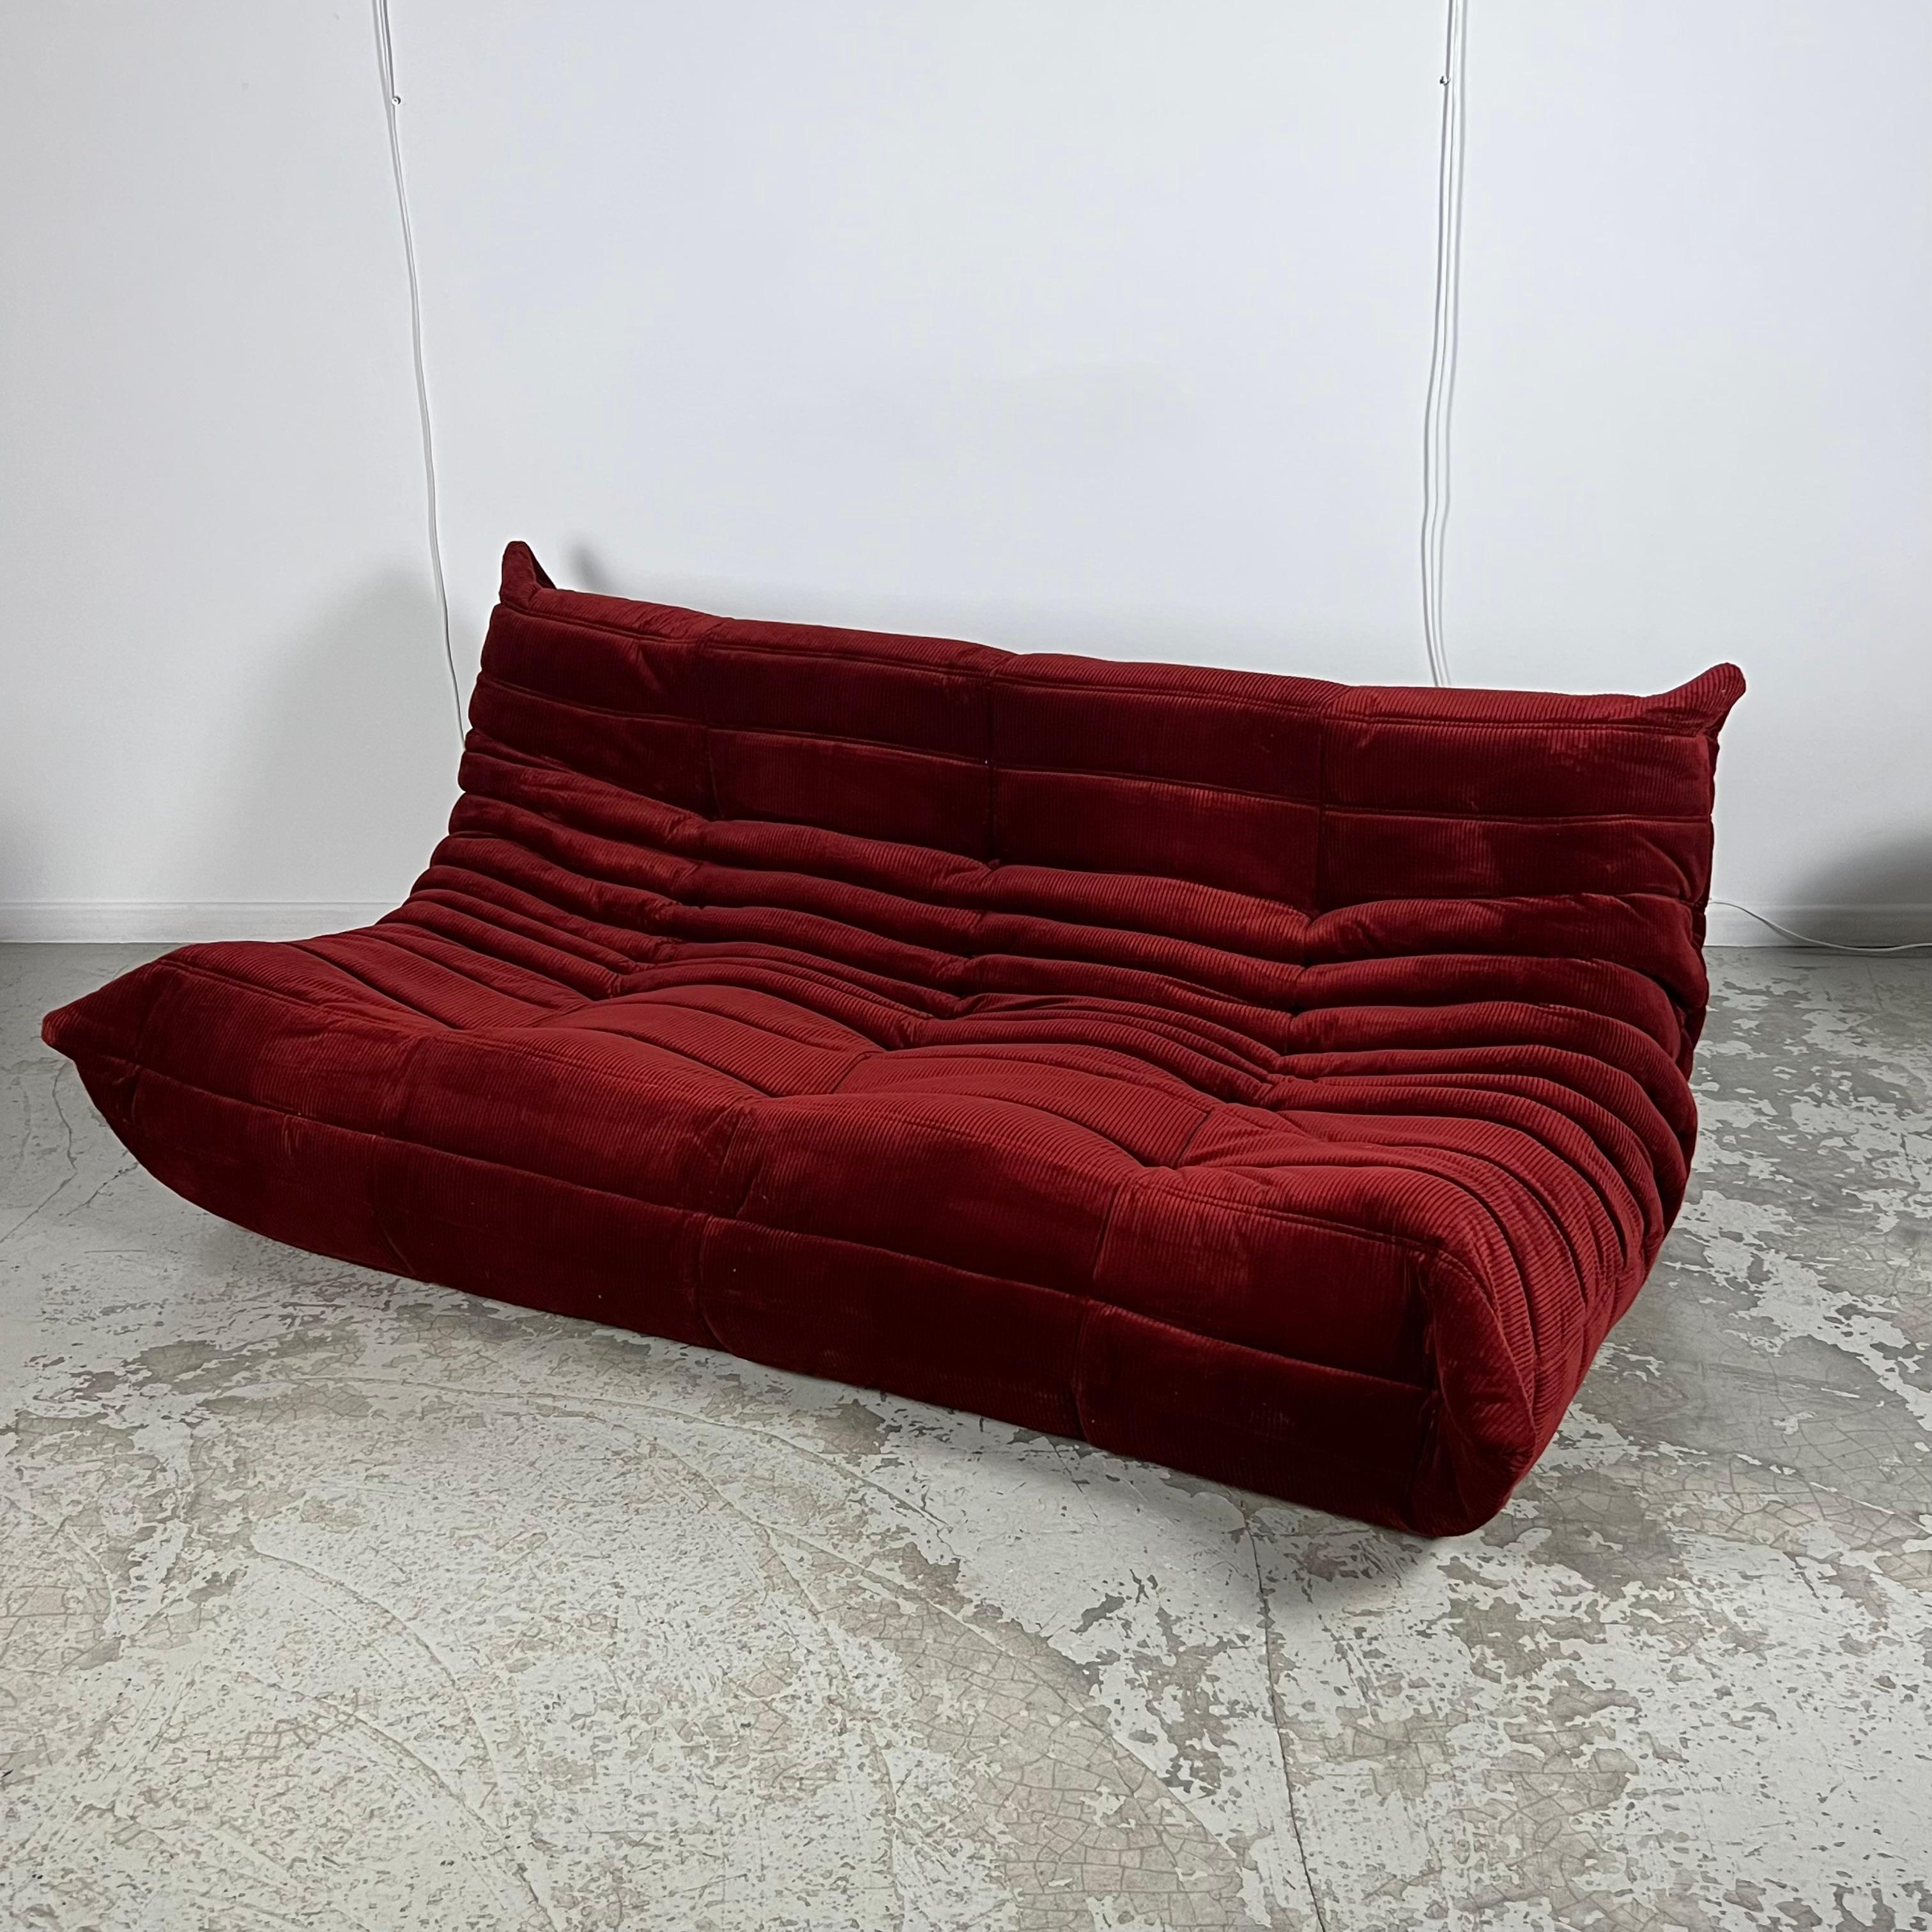 This sofa was designed by Michel Ducaroy for Ligne Roset in the 70’s. He devoted 26 years of his life to the head of Ligne Roset’s design department. It was in 1973 that he designed his most iconic creation: the Togo sofa. 
According to him, this